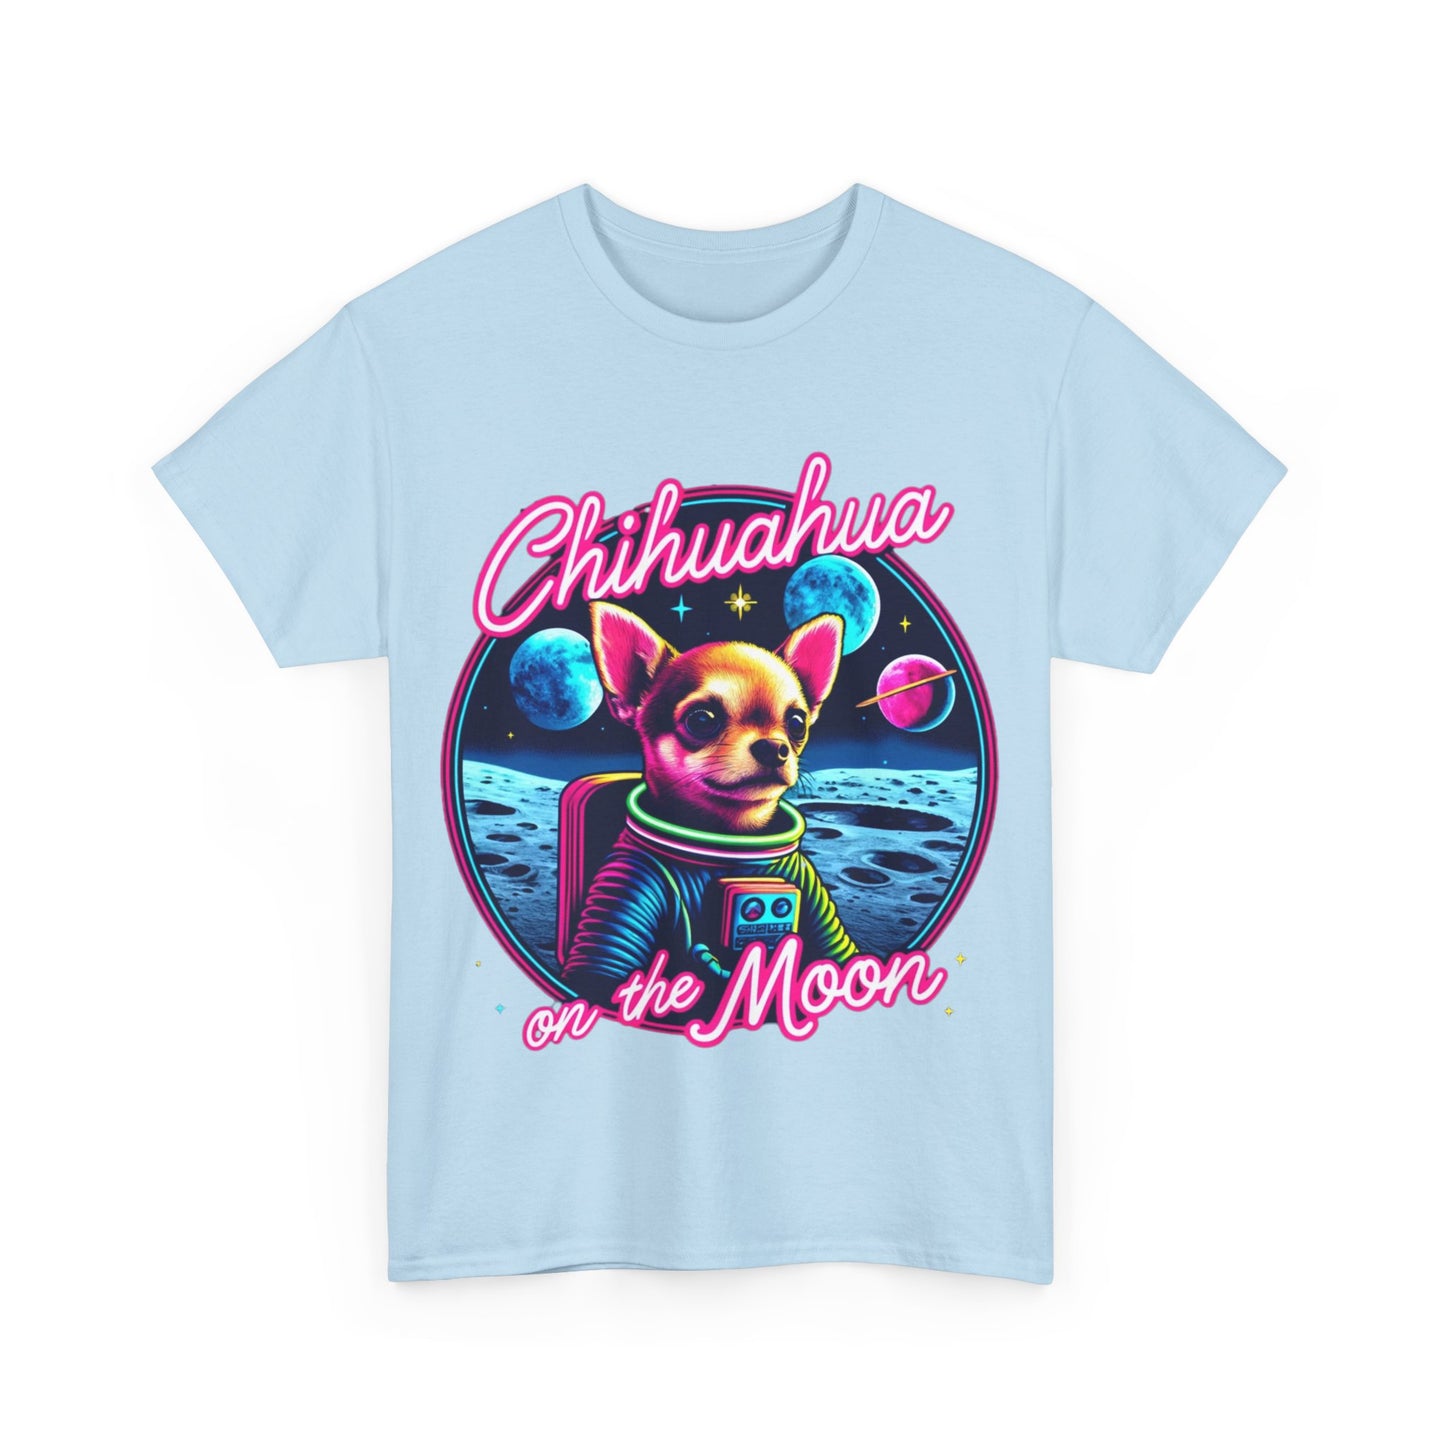 Buy 'Chihuahua on the Moon' T-Shirt: Neon Space Adventure Tee for Pet Lovers